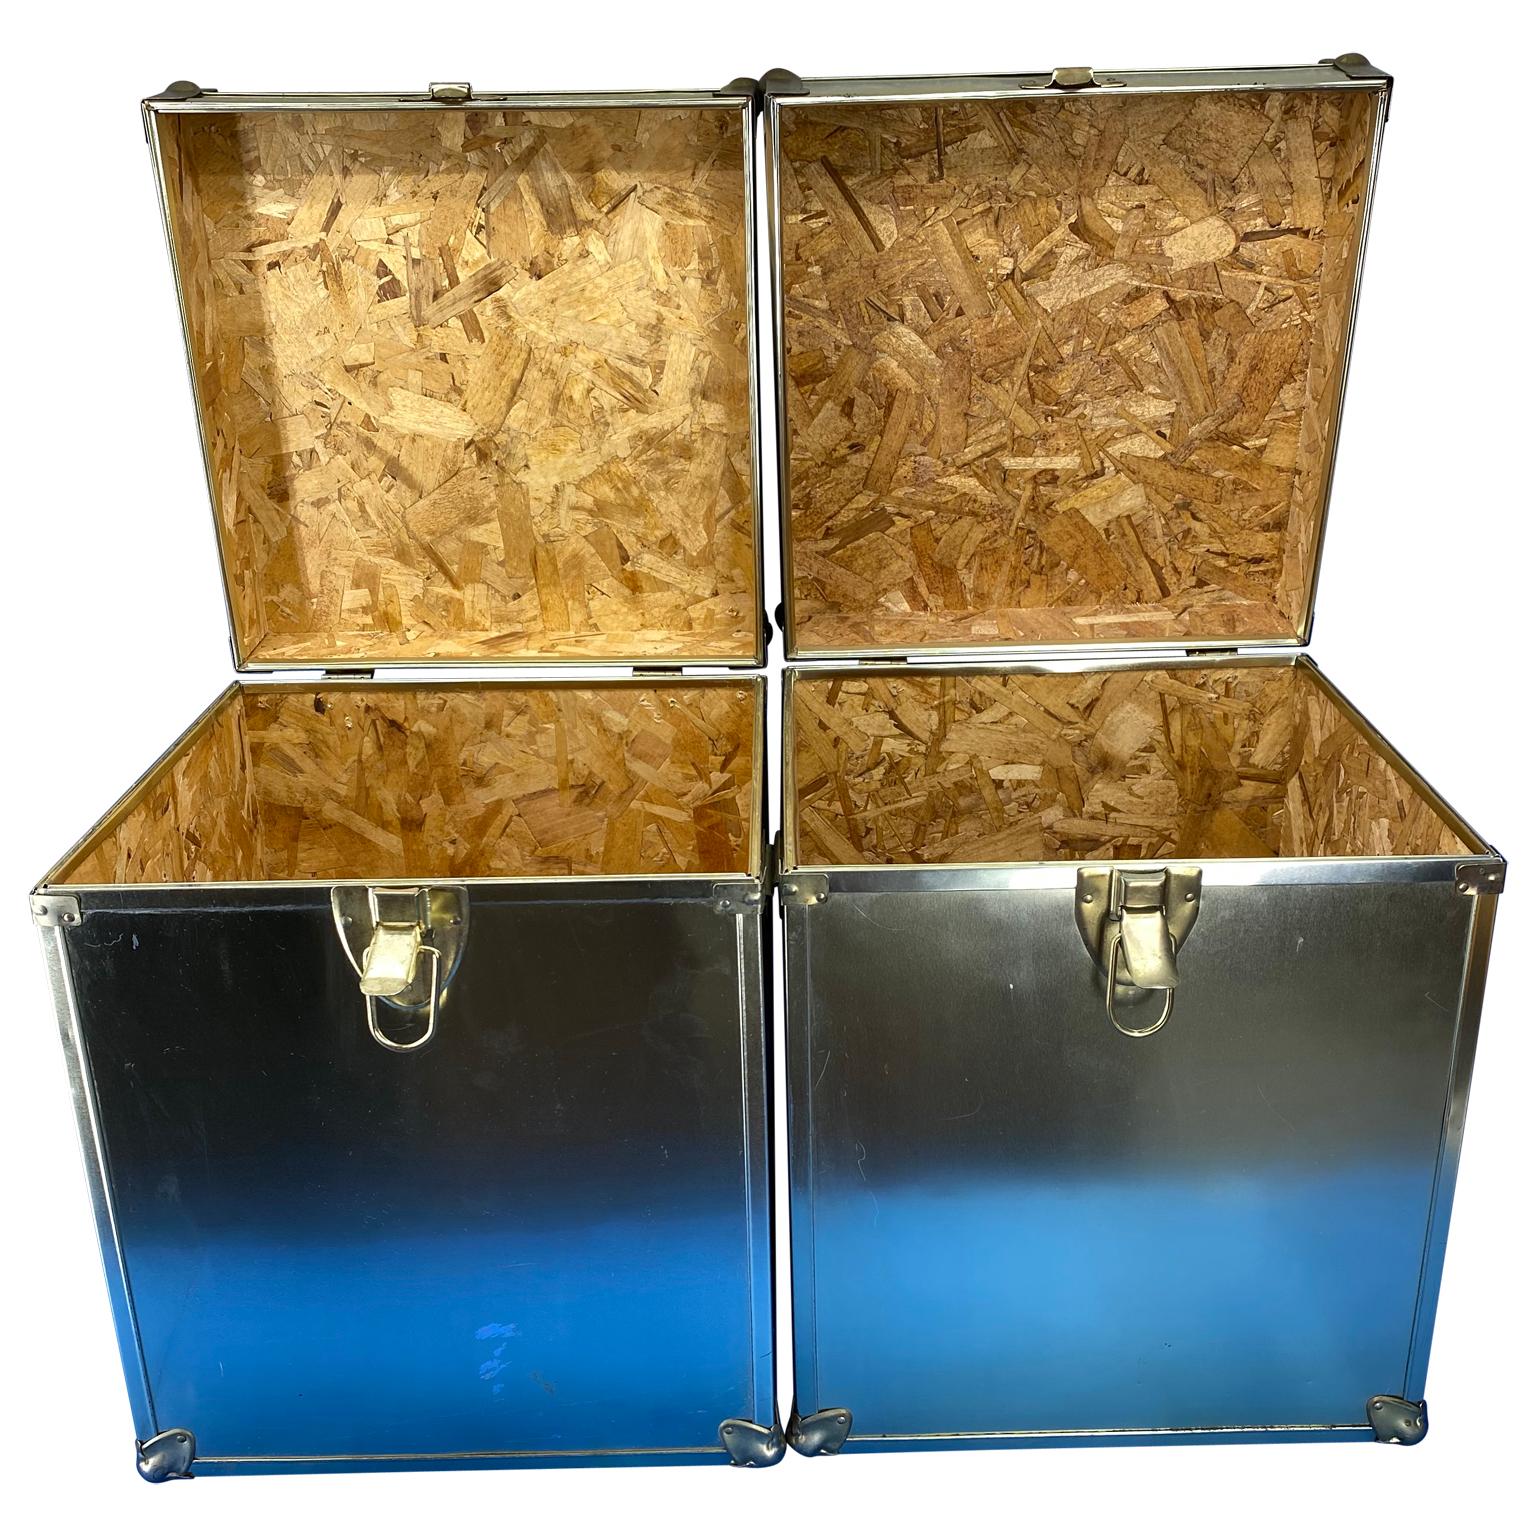 North American Pair Of Cedar Wood Inserted Boxes For Storage Or Chrome Side Tables